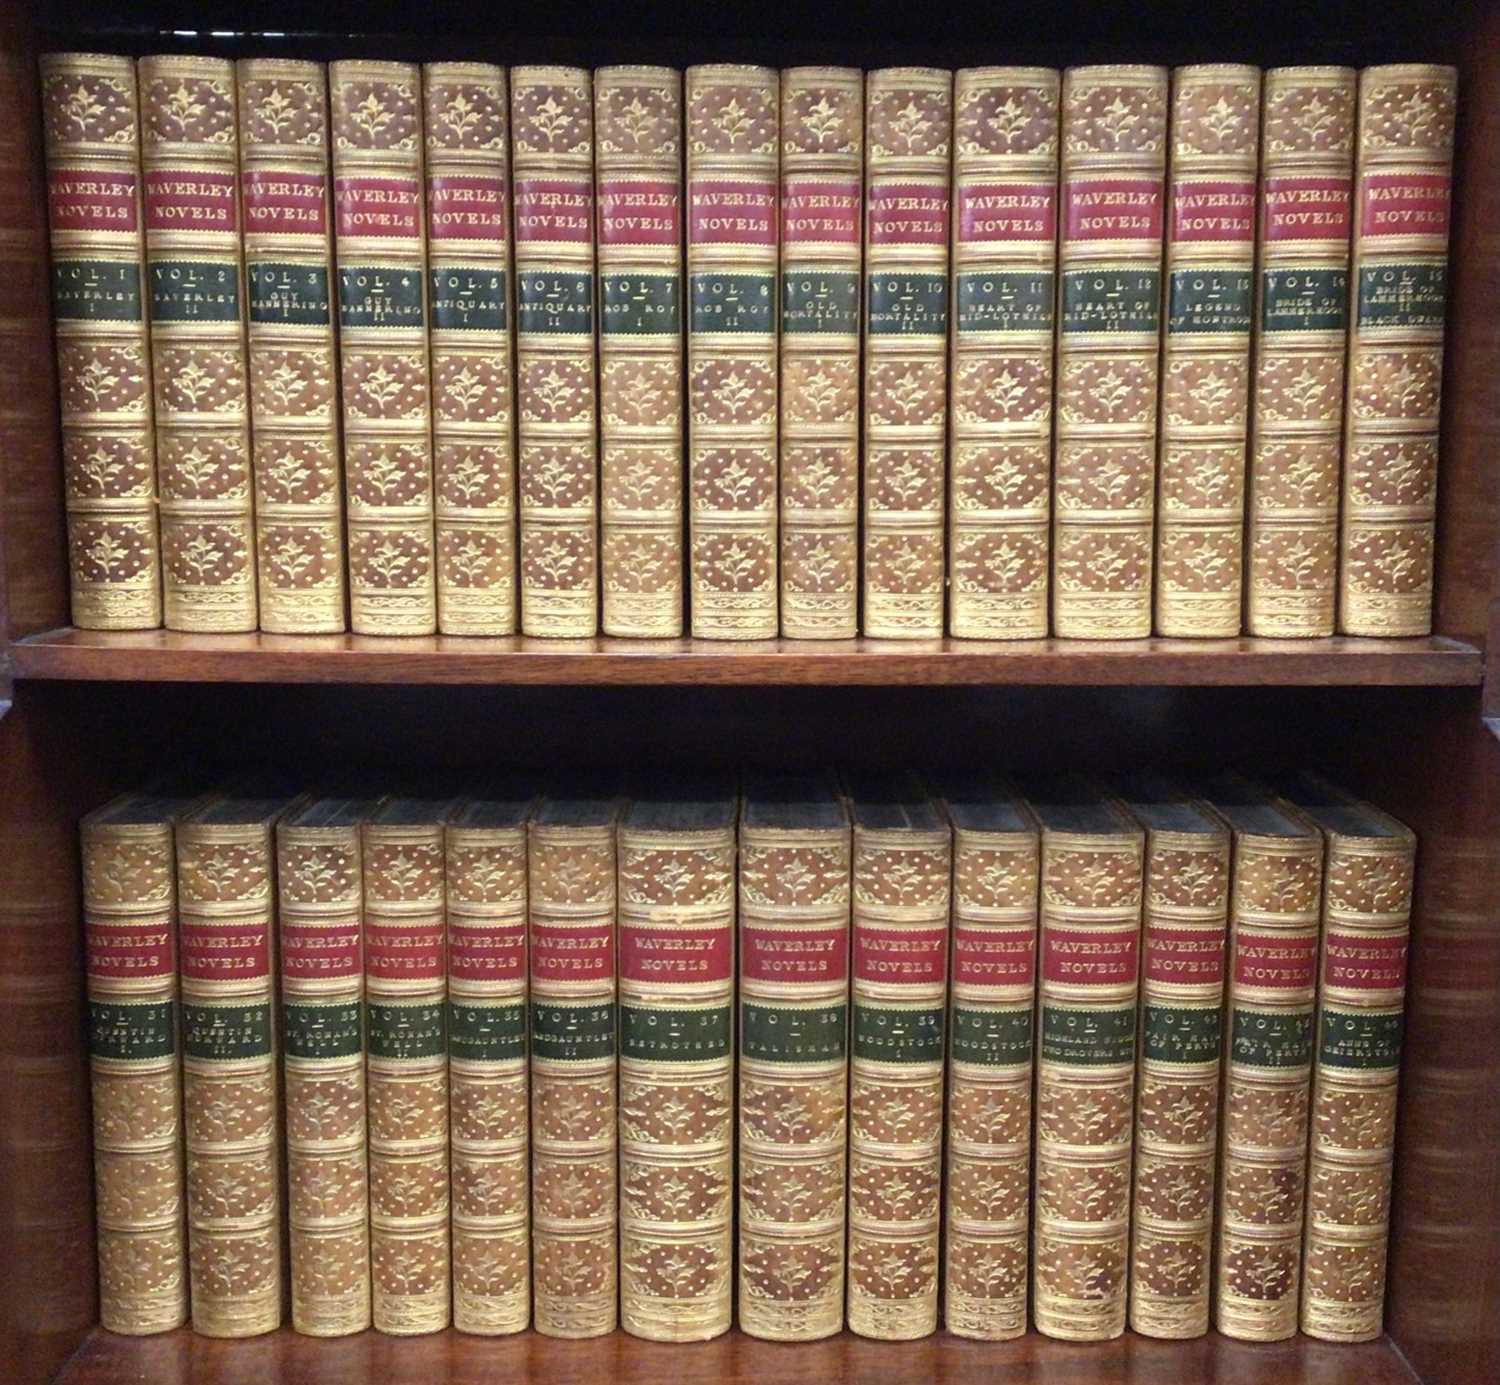 Sir Walter Scott, The Waverley Novels, published Adam and Charles Black 1865-1868, 48 volumes, all i